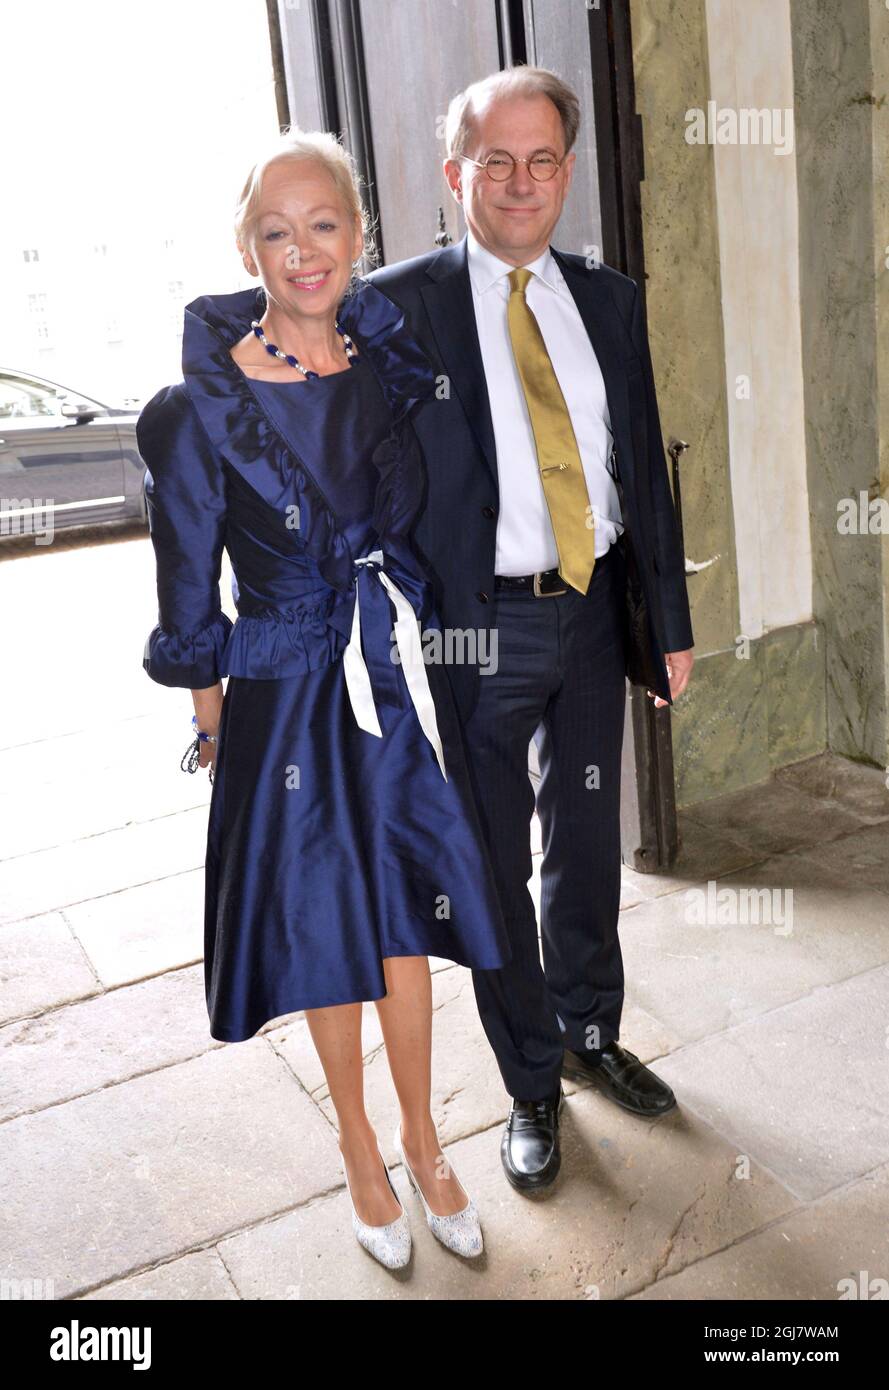 Speaker of the Swedish Parliament Per Westerberg with wife Ylwa Westerberg arrive to the service in the Royal Chapel in Stockholm, Sweden, May 19, 2013. The banns of marriage for Princess Madeleine and Christopher O'Neill will be read during Sundays service.     Stock Photo